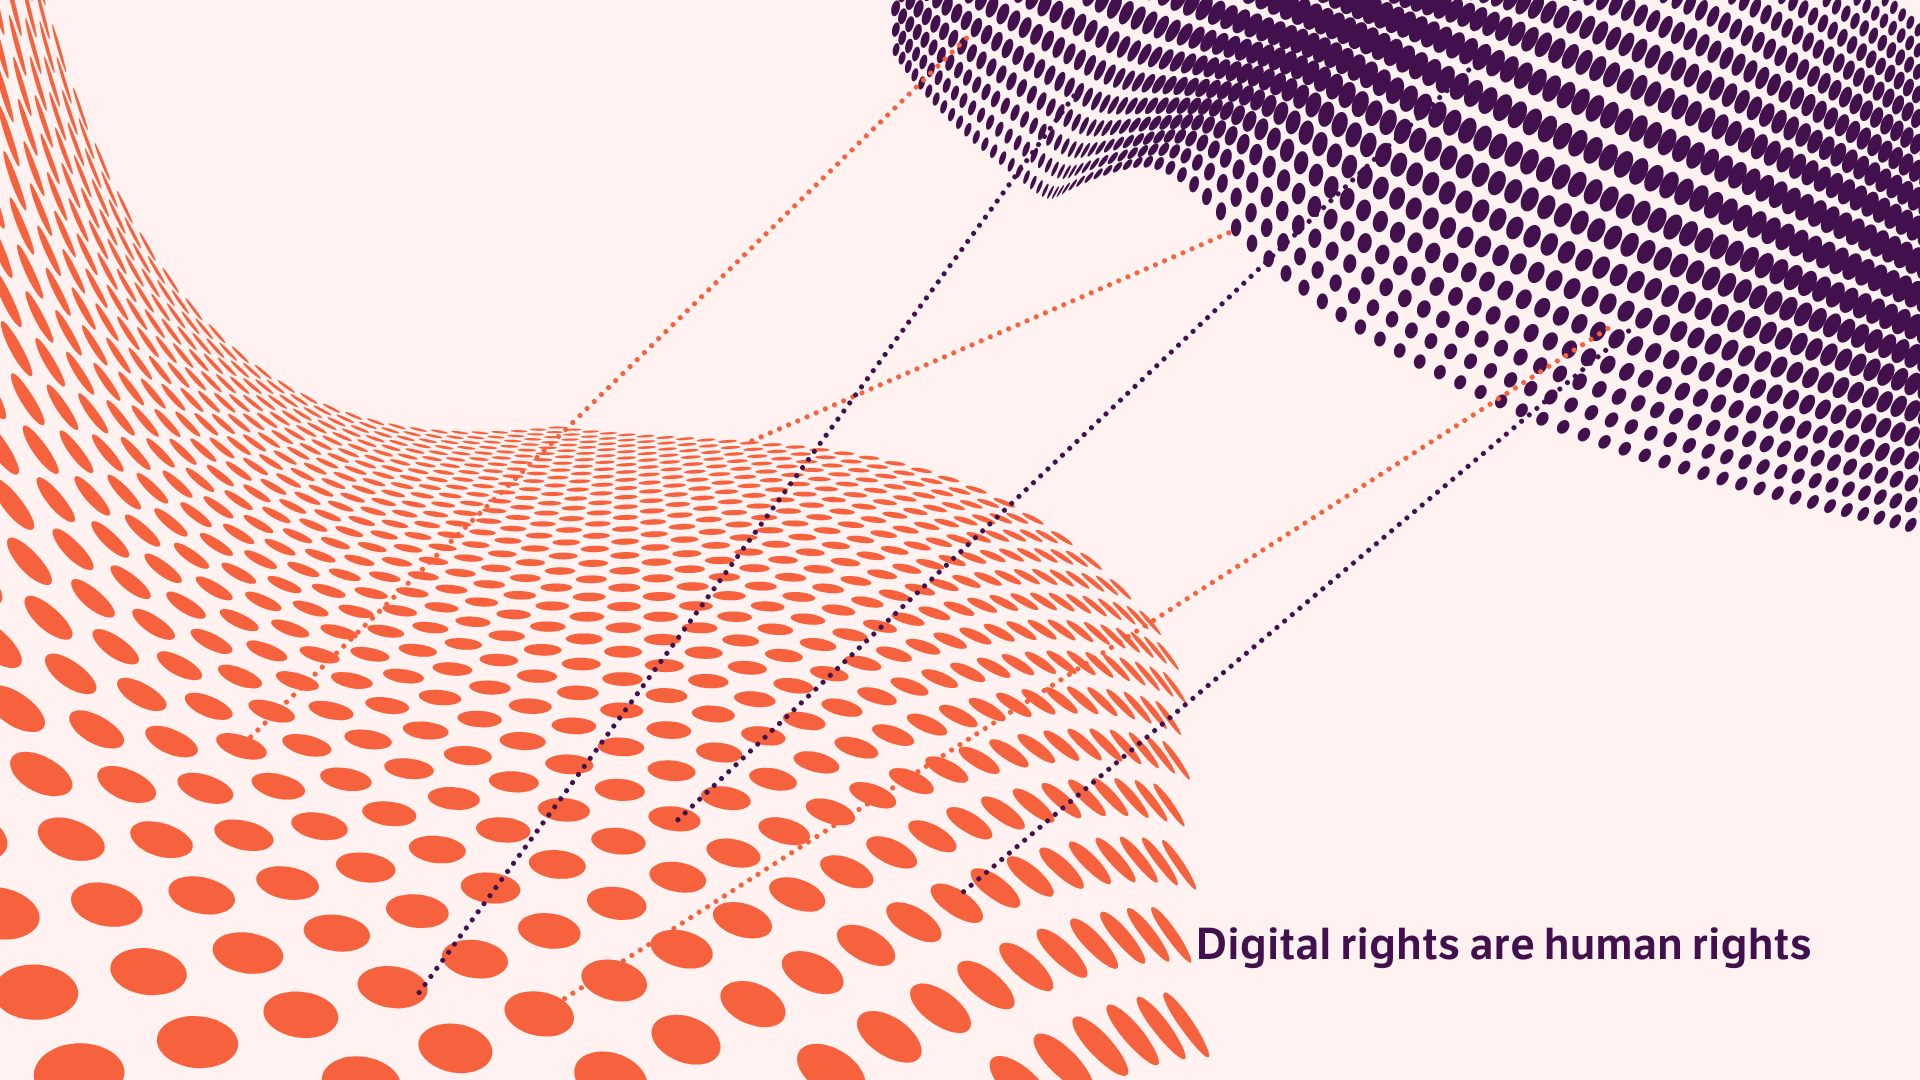 Digital rights are human rights